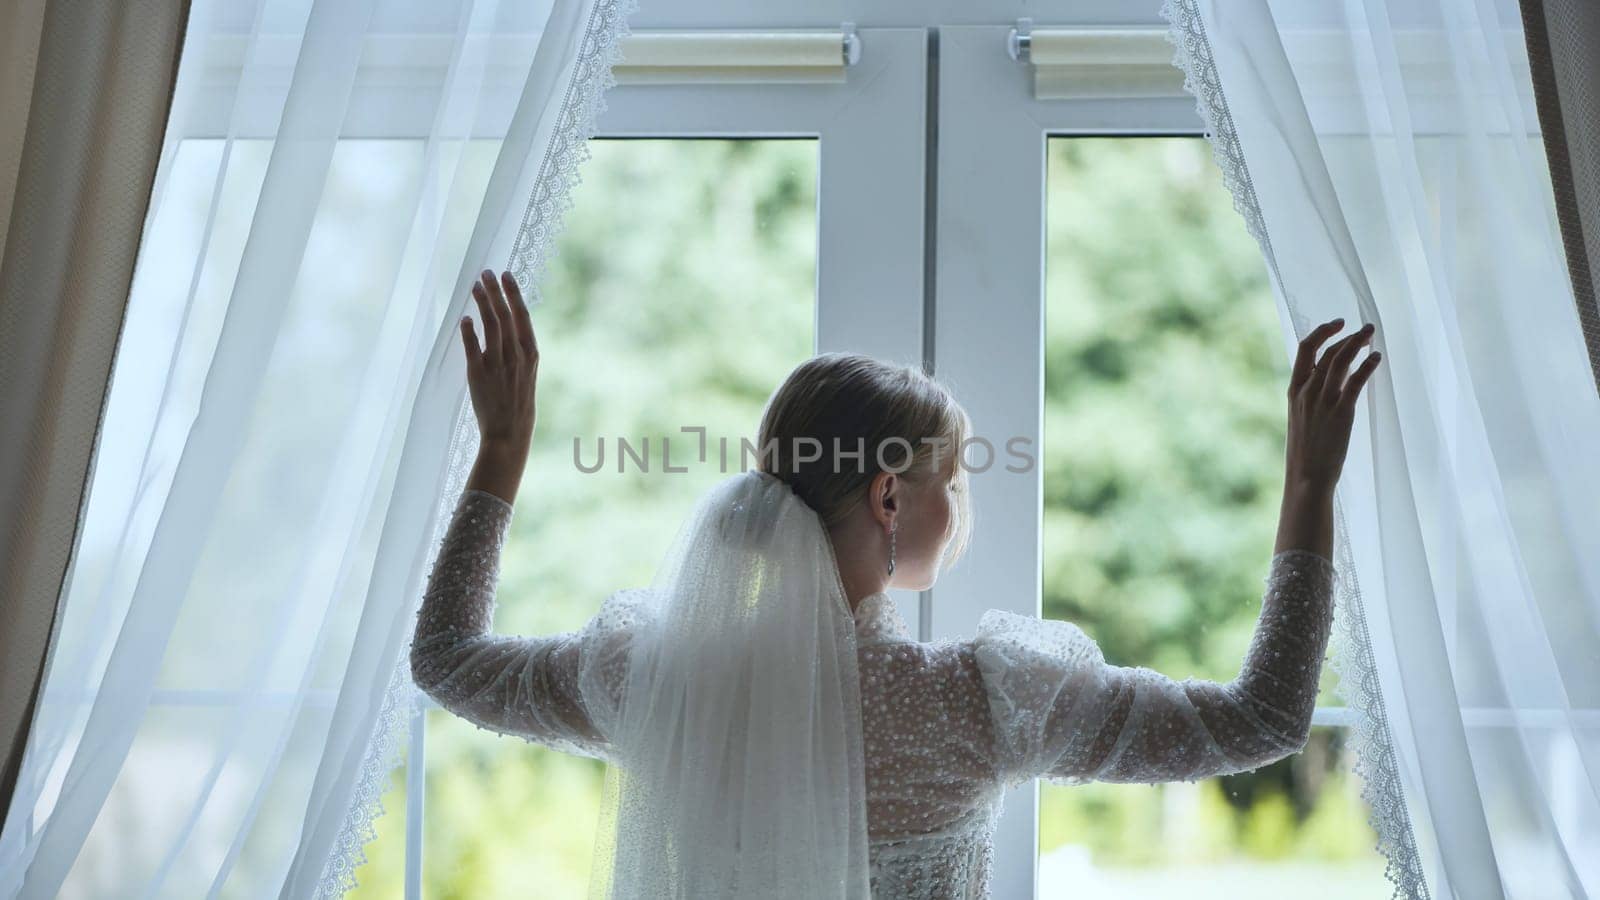 The bride adjusts the curtains at the window